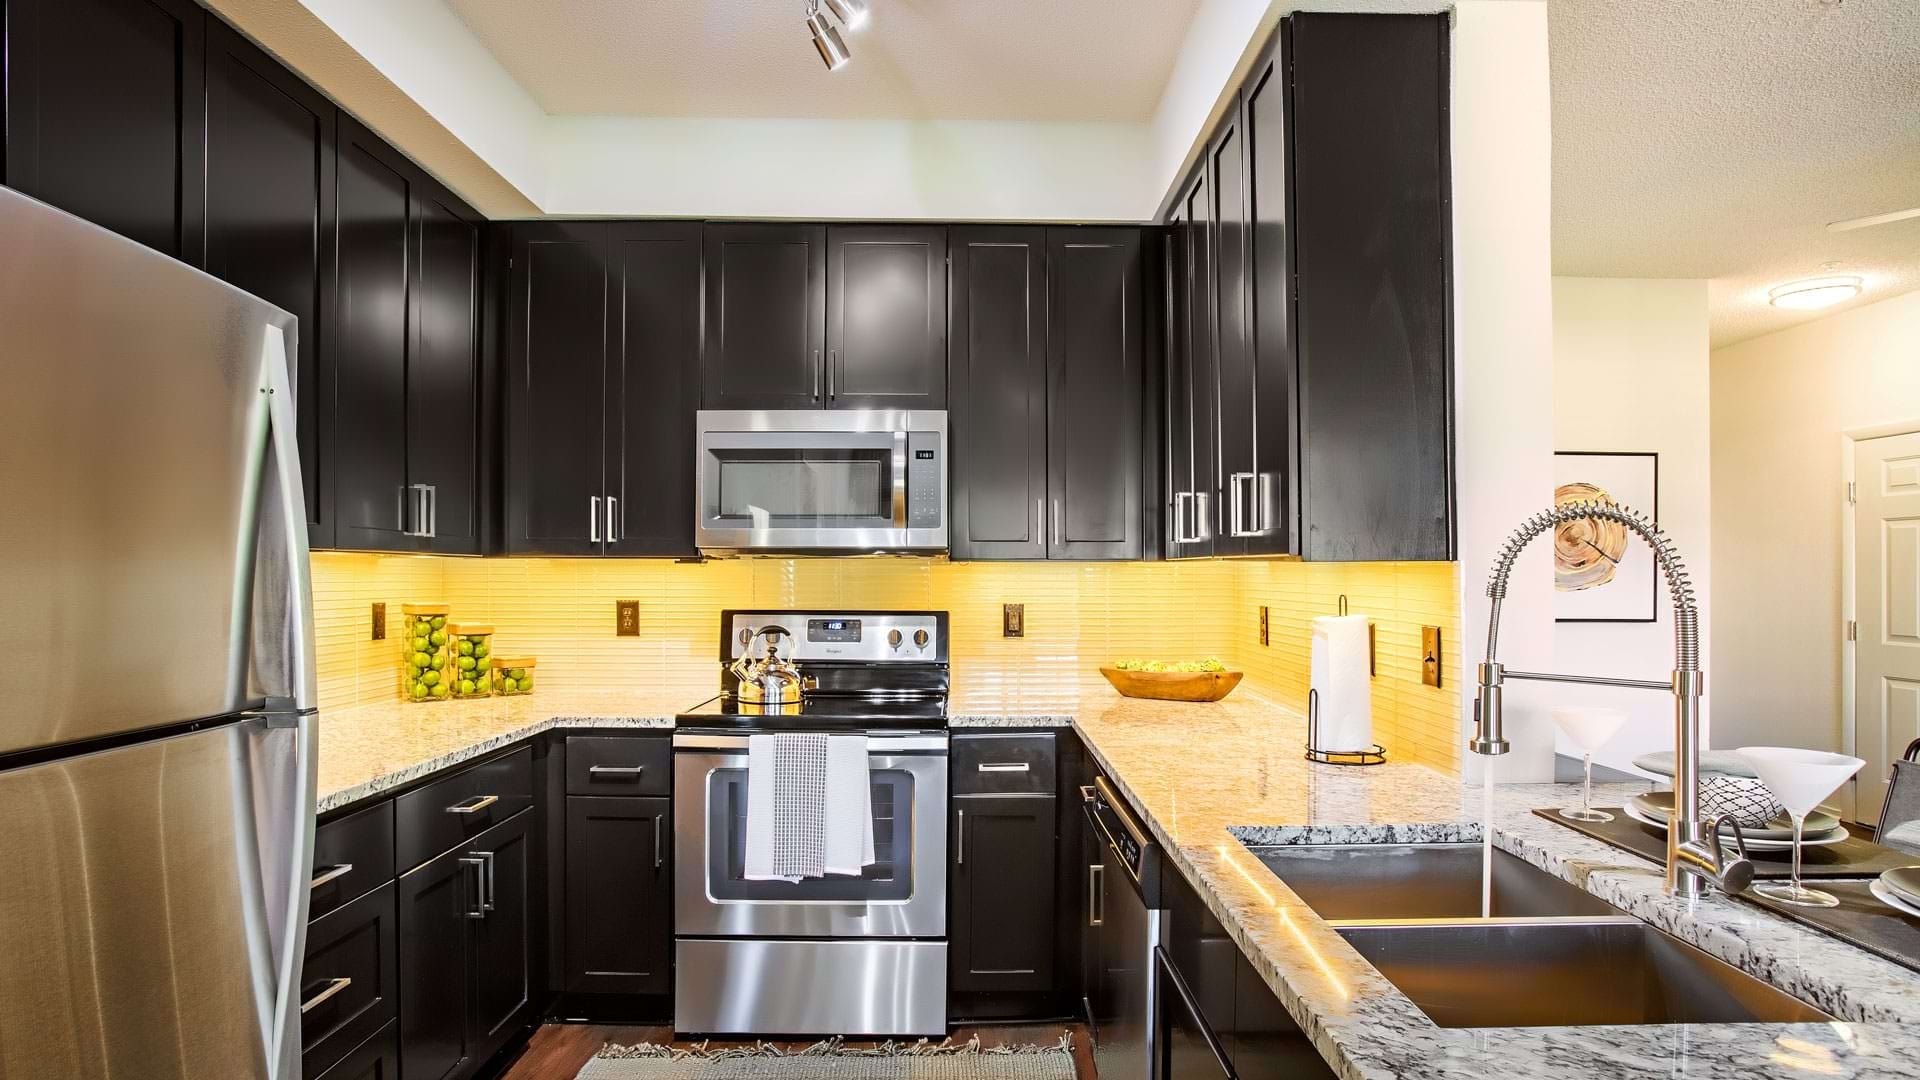 Modern Kitchen Cabinetry with Under Cabinet Lighting at Our Apartments for Rent in Durham, NC